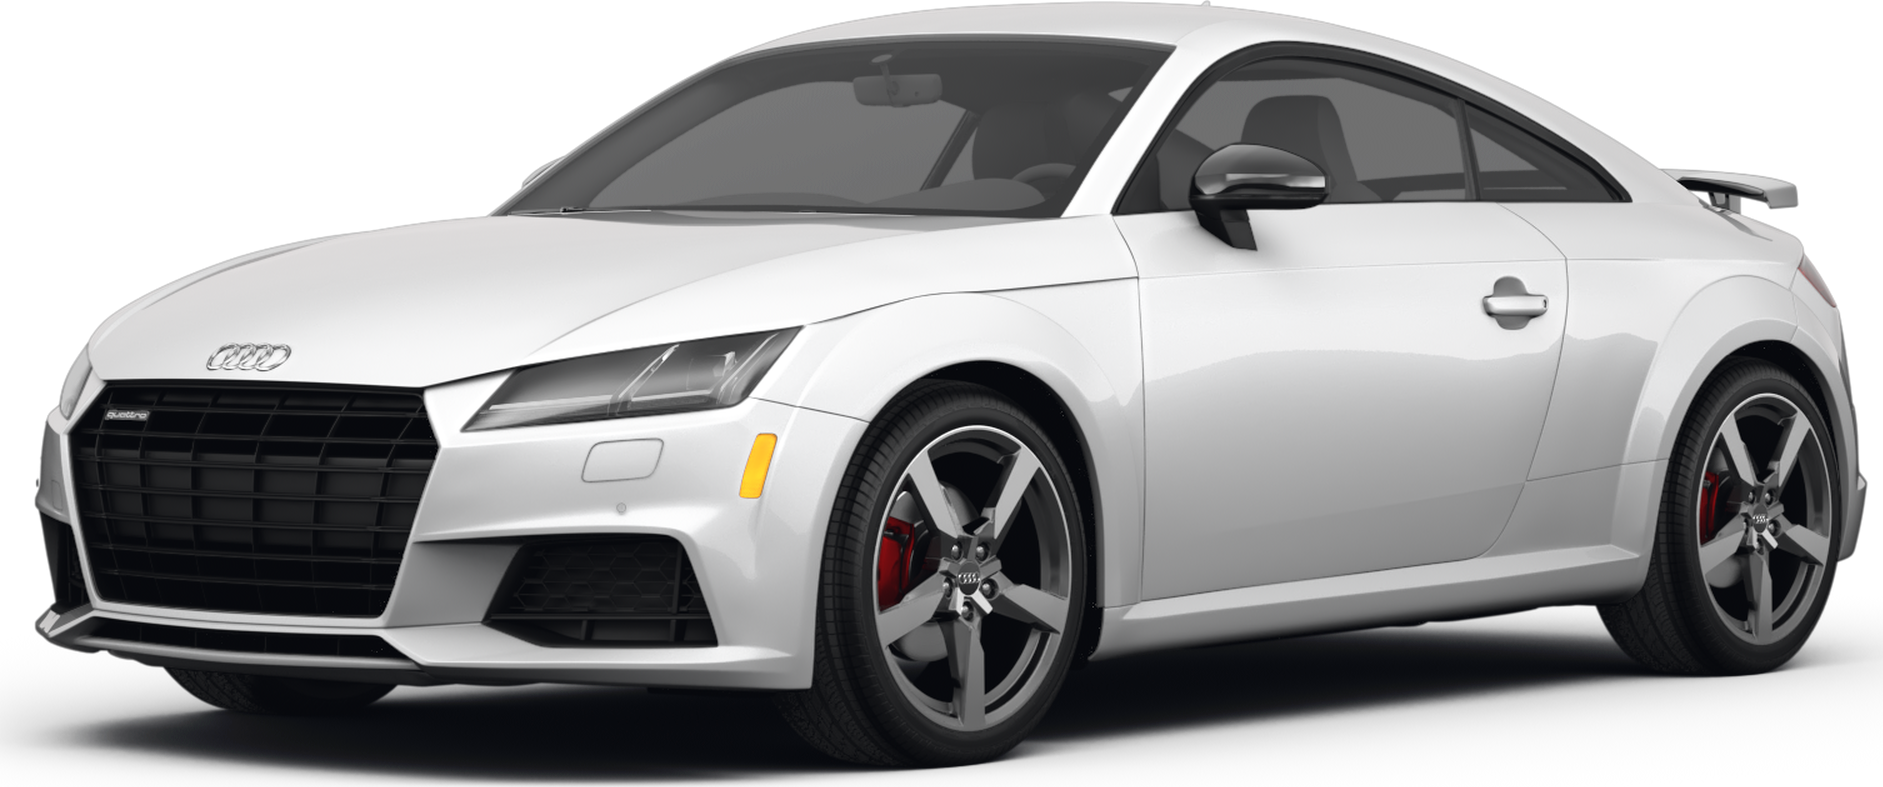 Three used Audi TT models to suit any enthusiast's budget